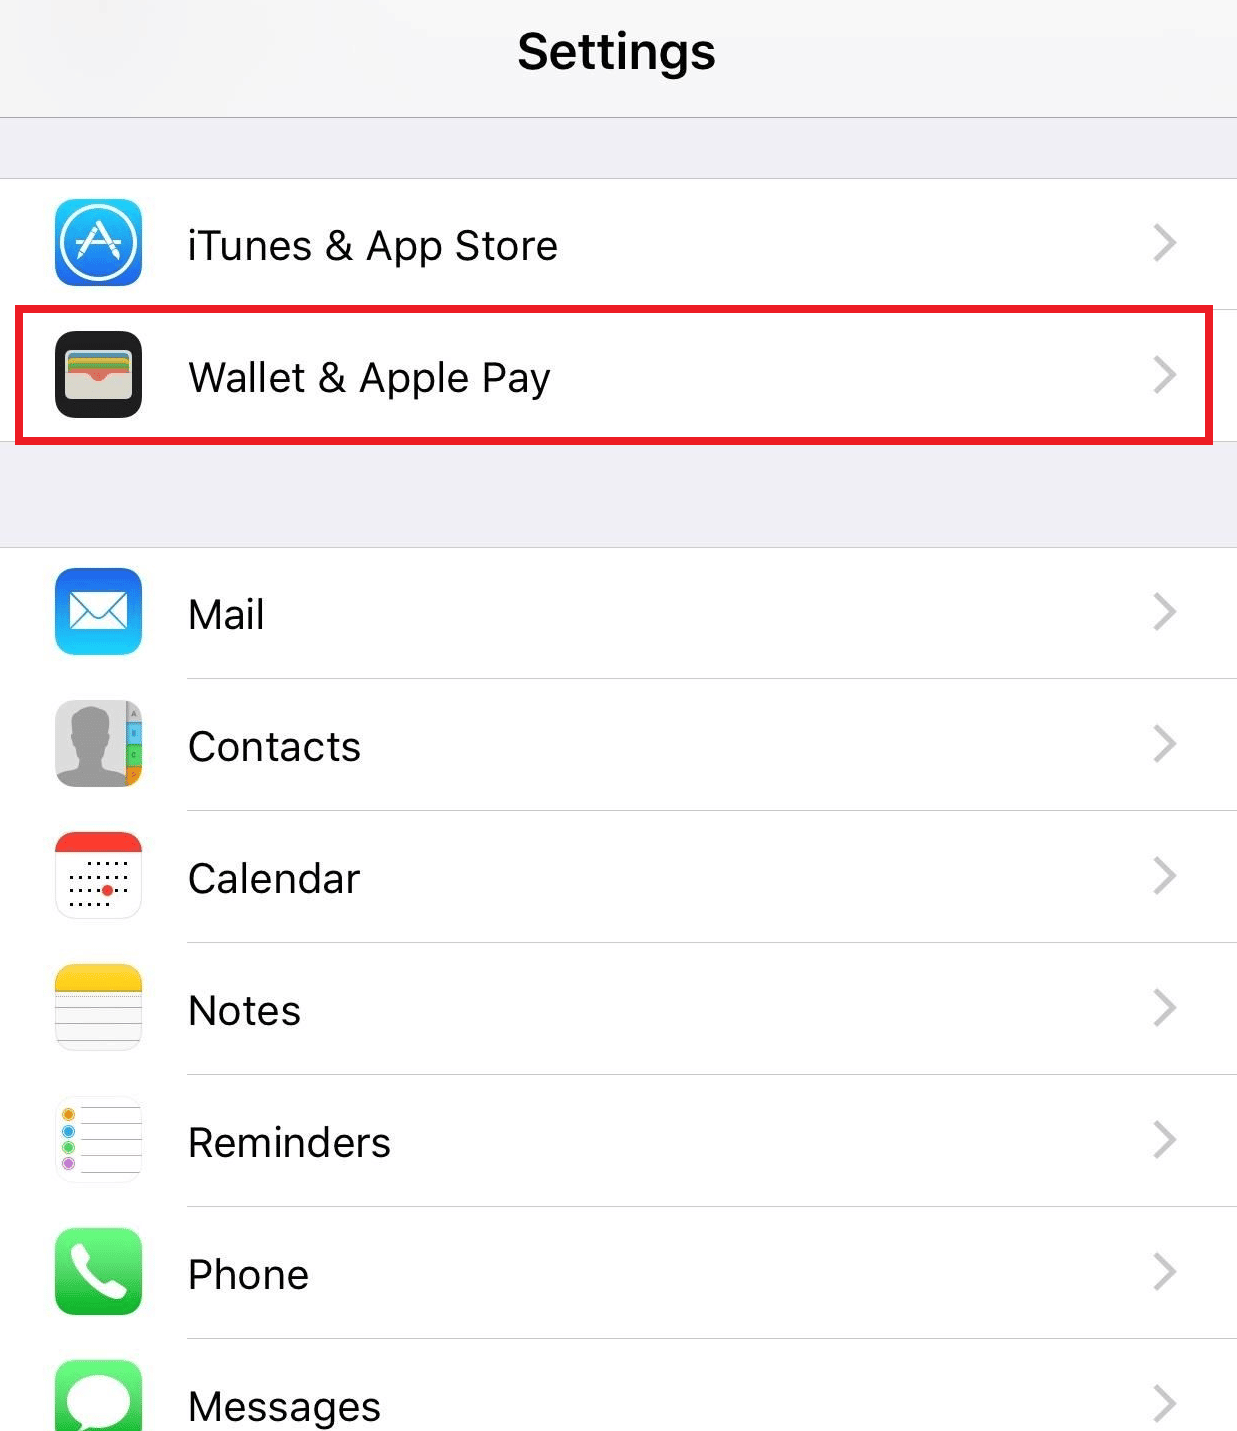 Tap on Wallet & Apple Pay from the list | How to Change Apple Payment Method